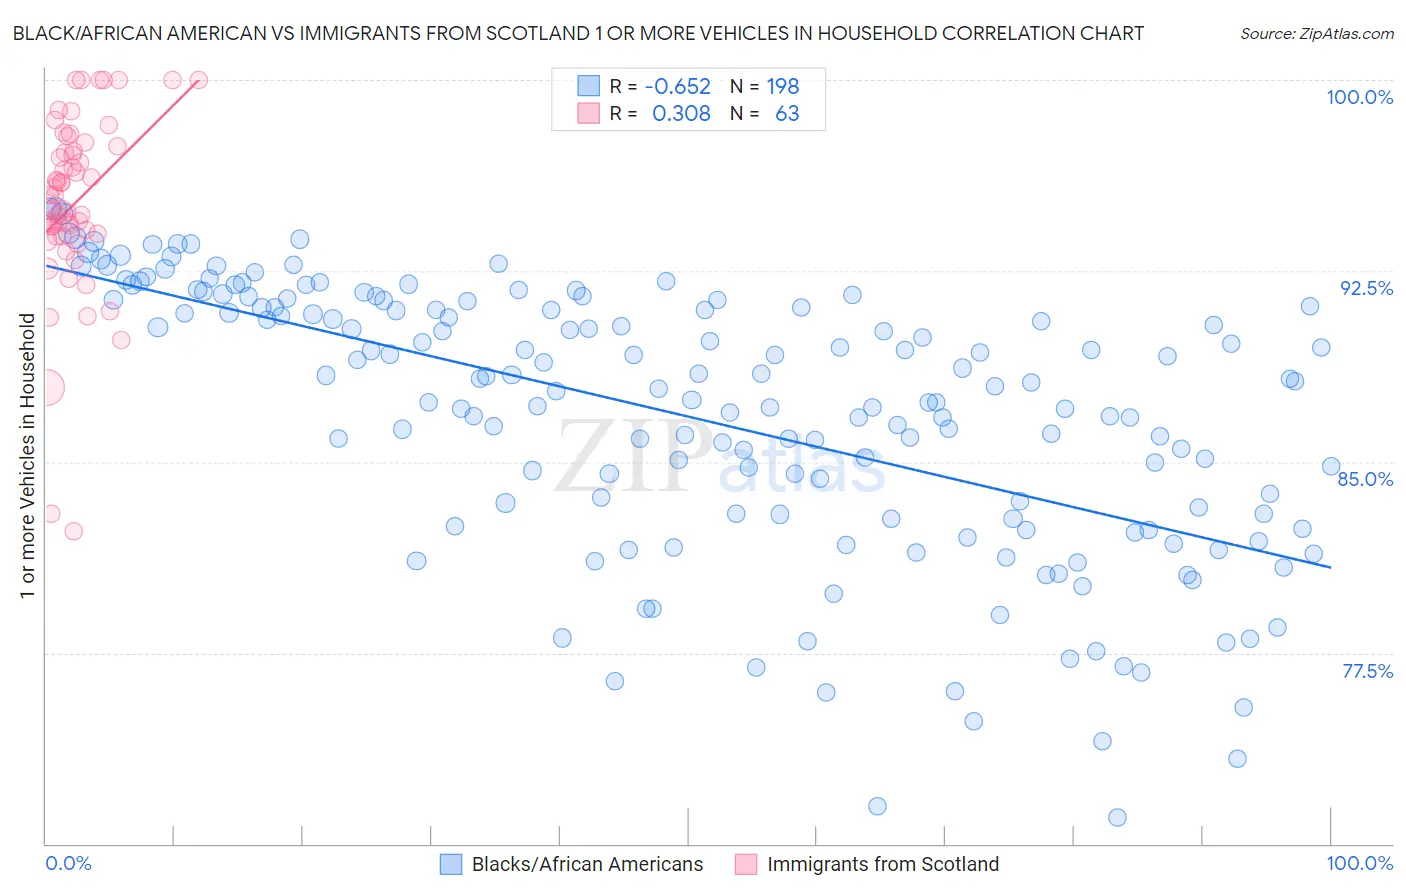 Black/African American vs Immigrants from Scotland 1 or more Vehicles in Household